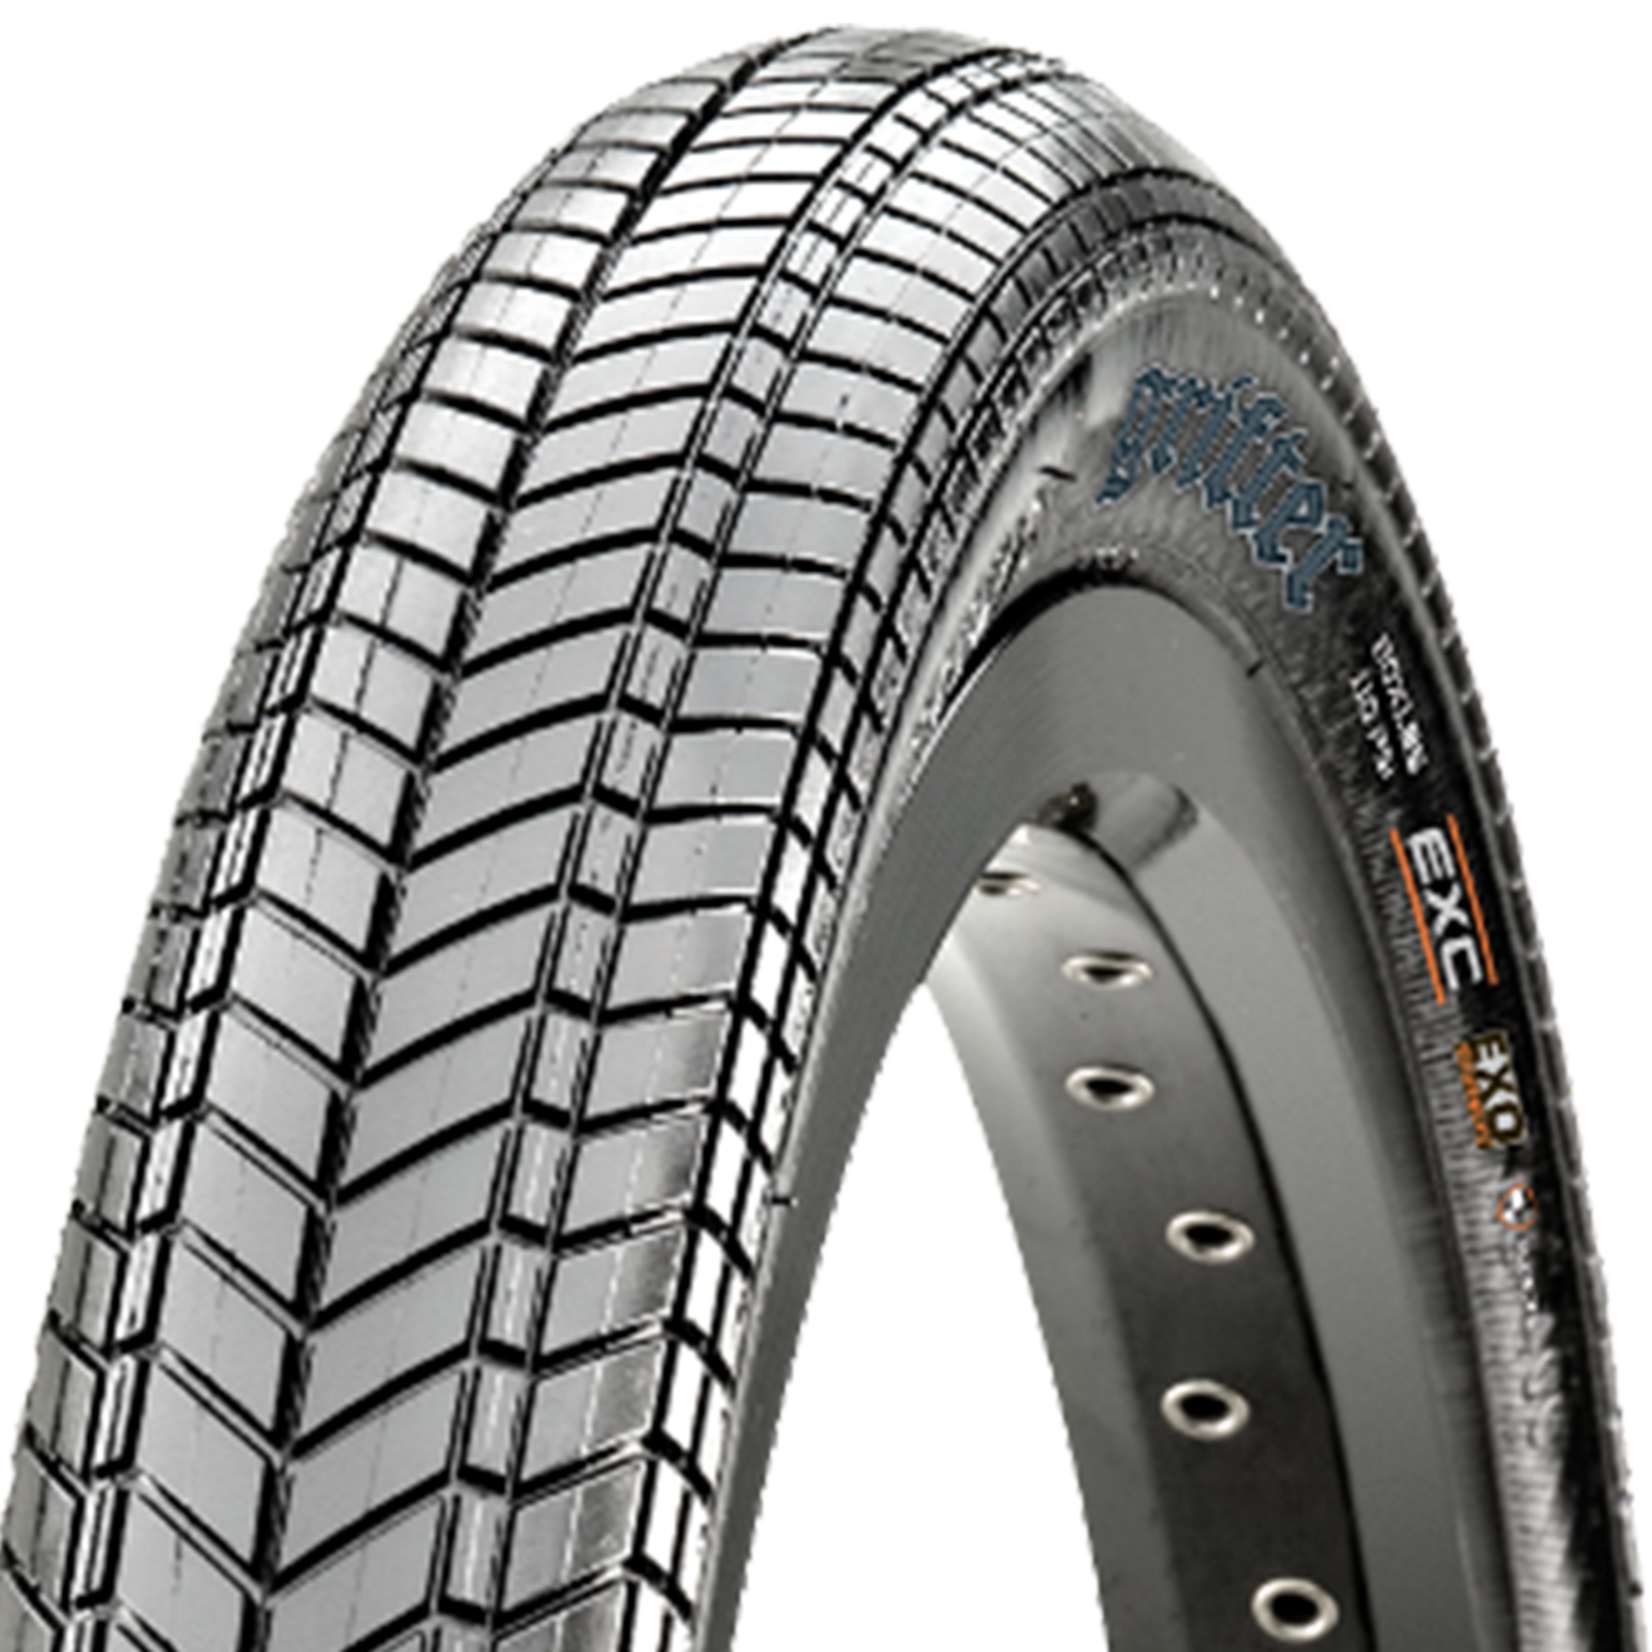 MAXXIS MAXXIS Grifter - 20 X 1.85 - 120 TPI - Foldable - EXO